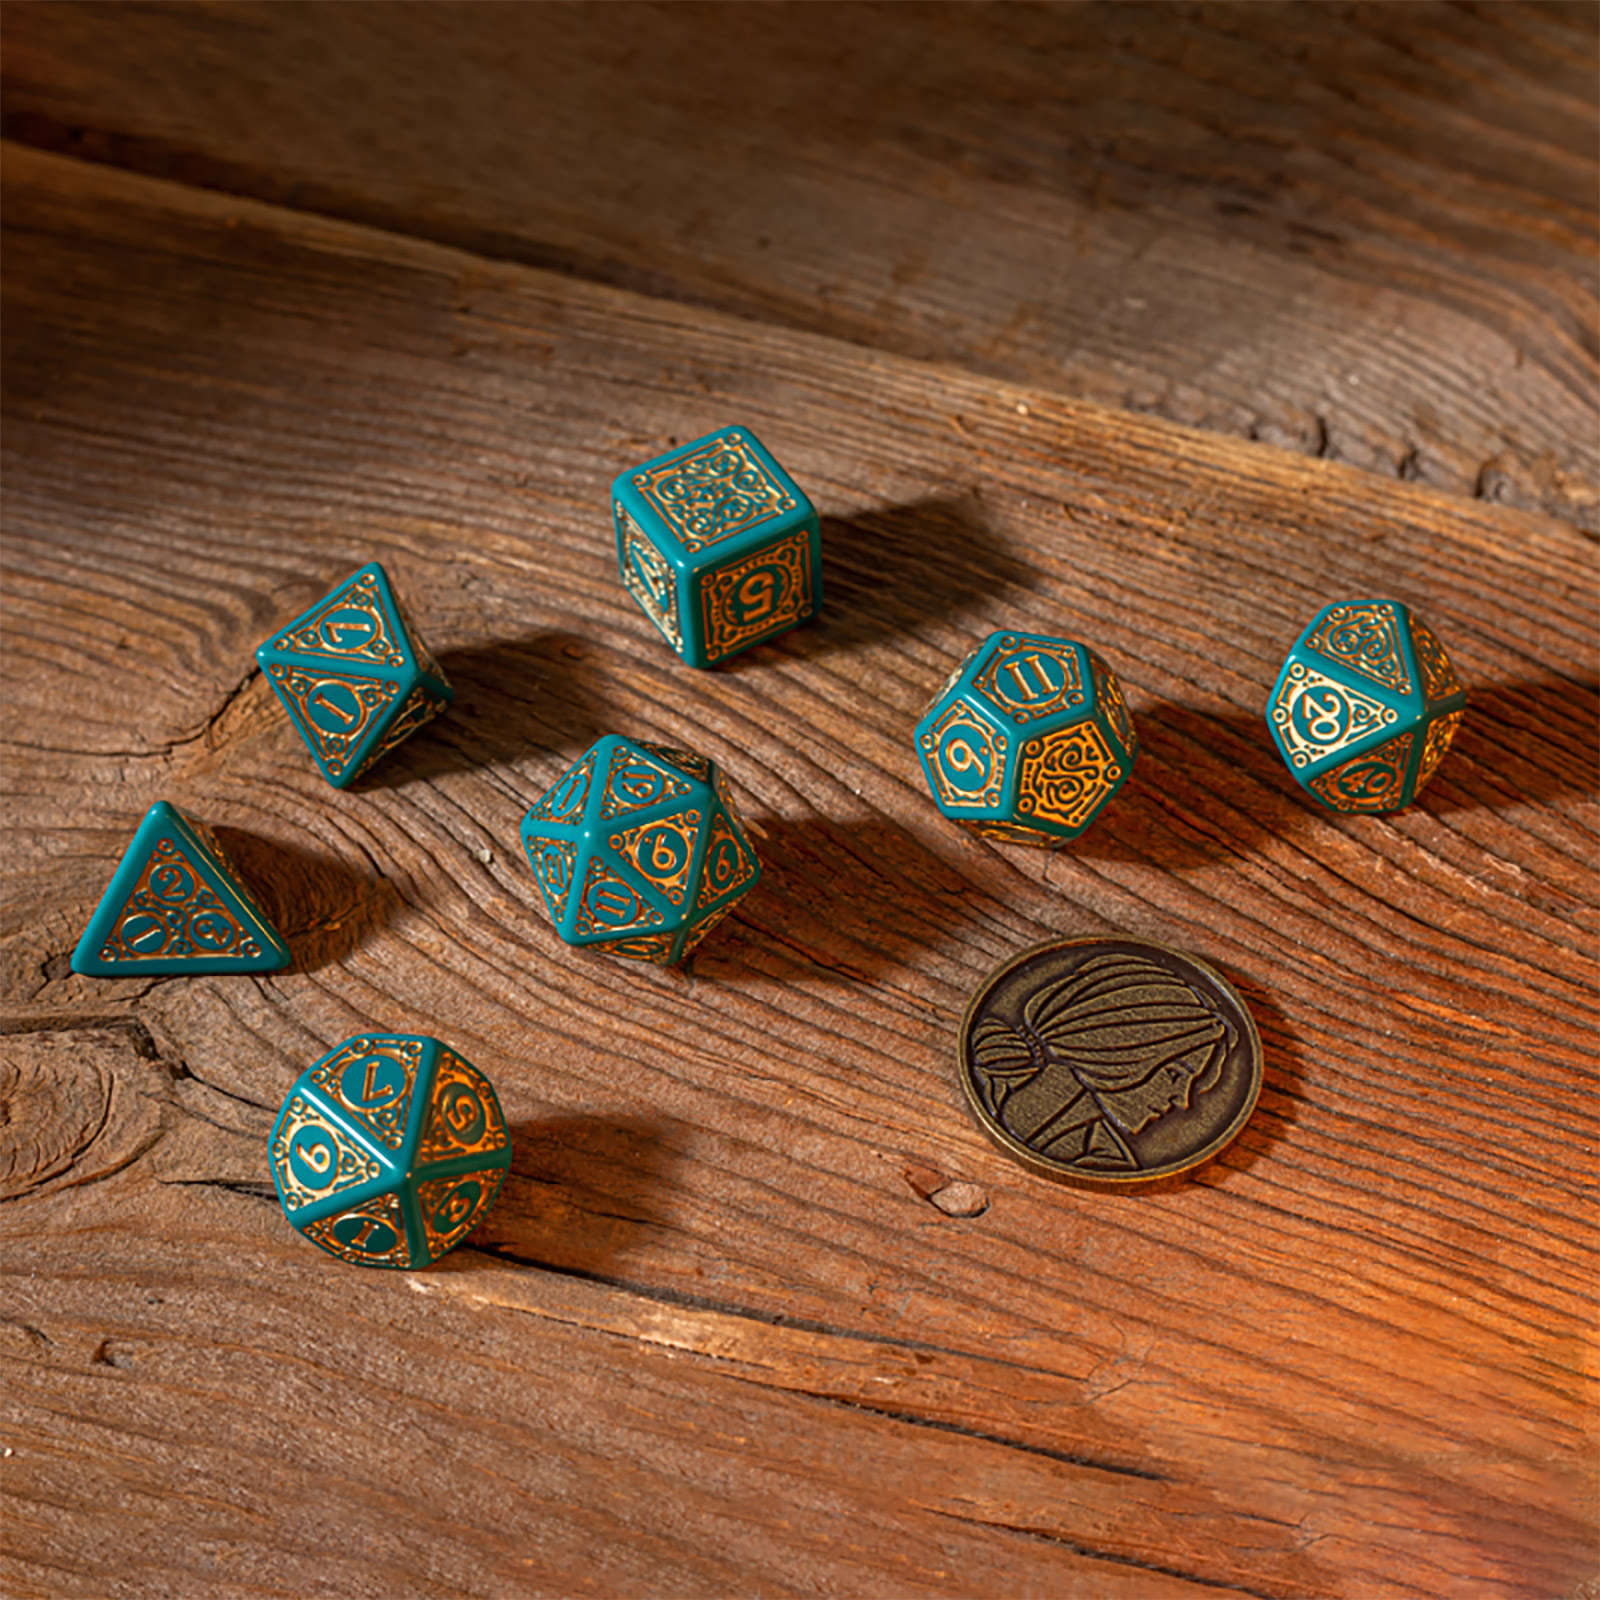 Witcher - Triss Beautiful Healer RPG Dice Set 7pcs with Collector's Coin